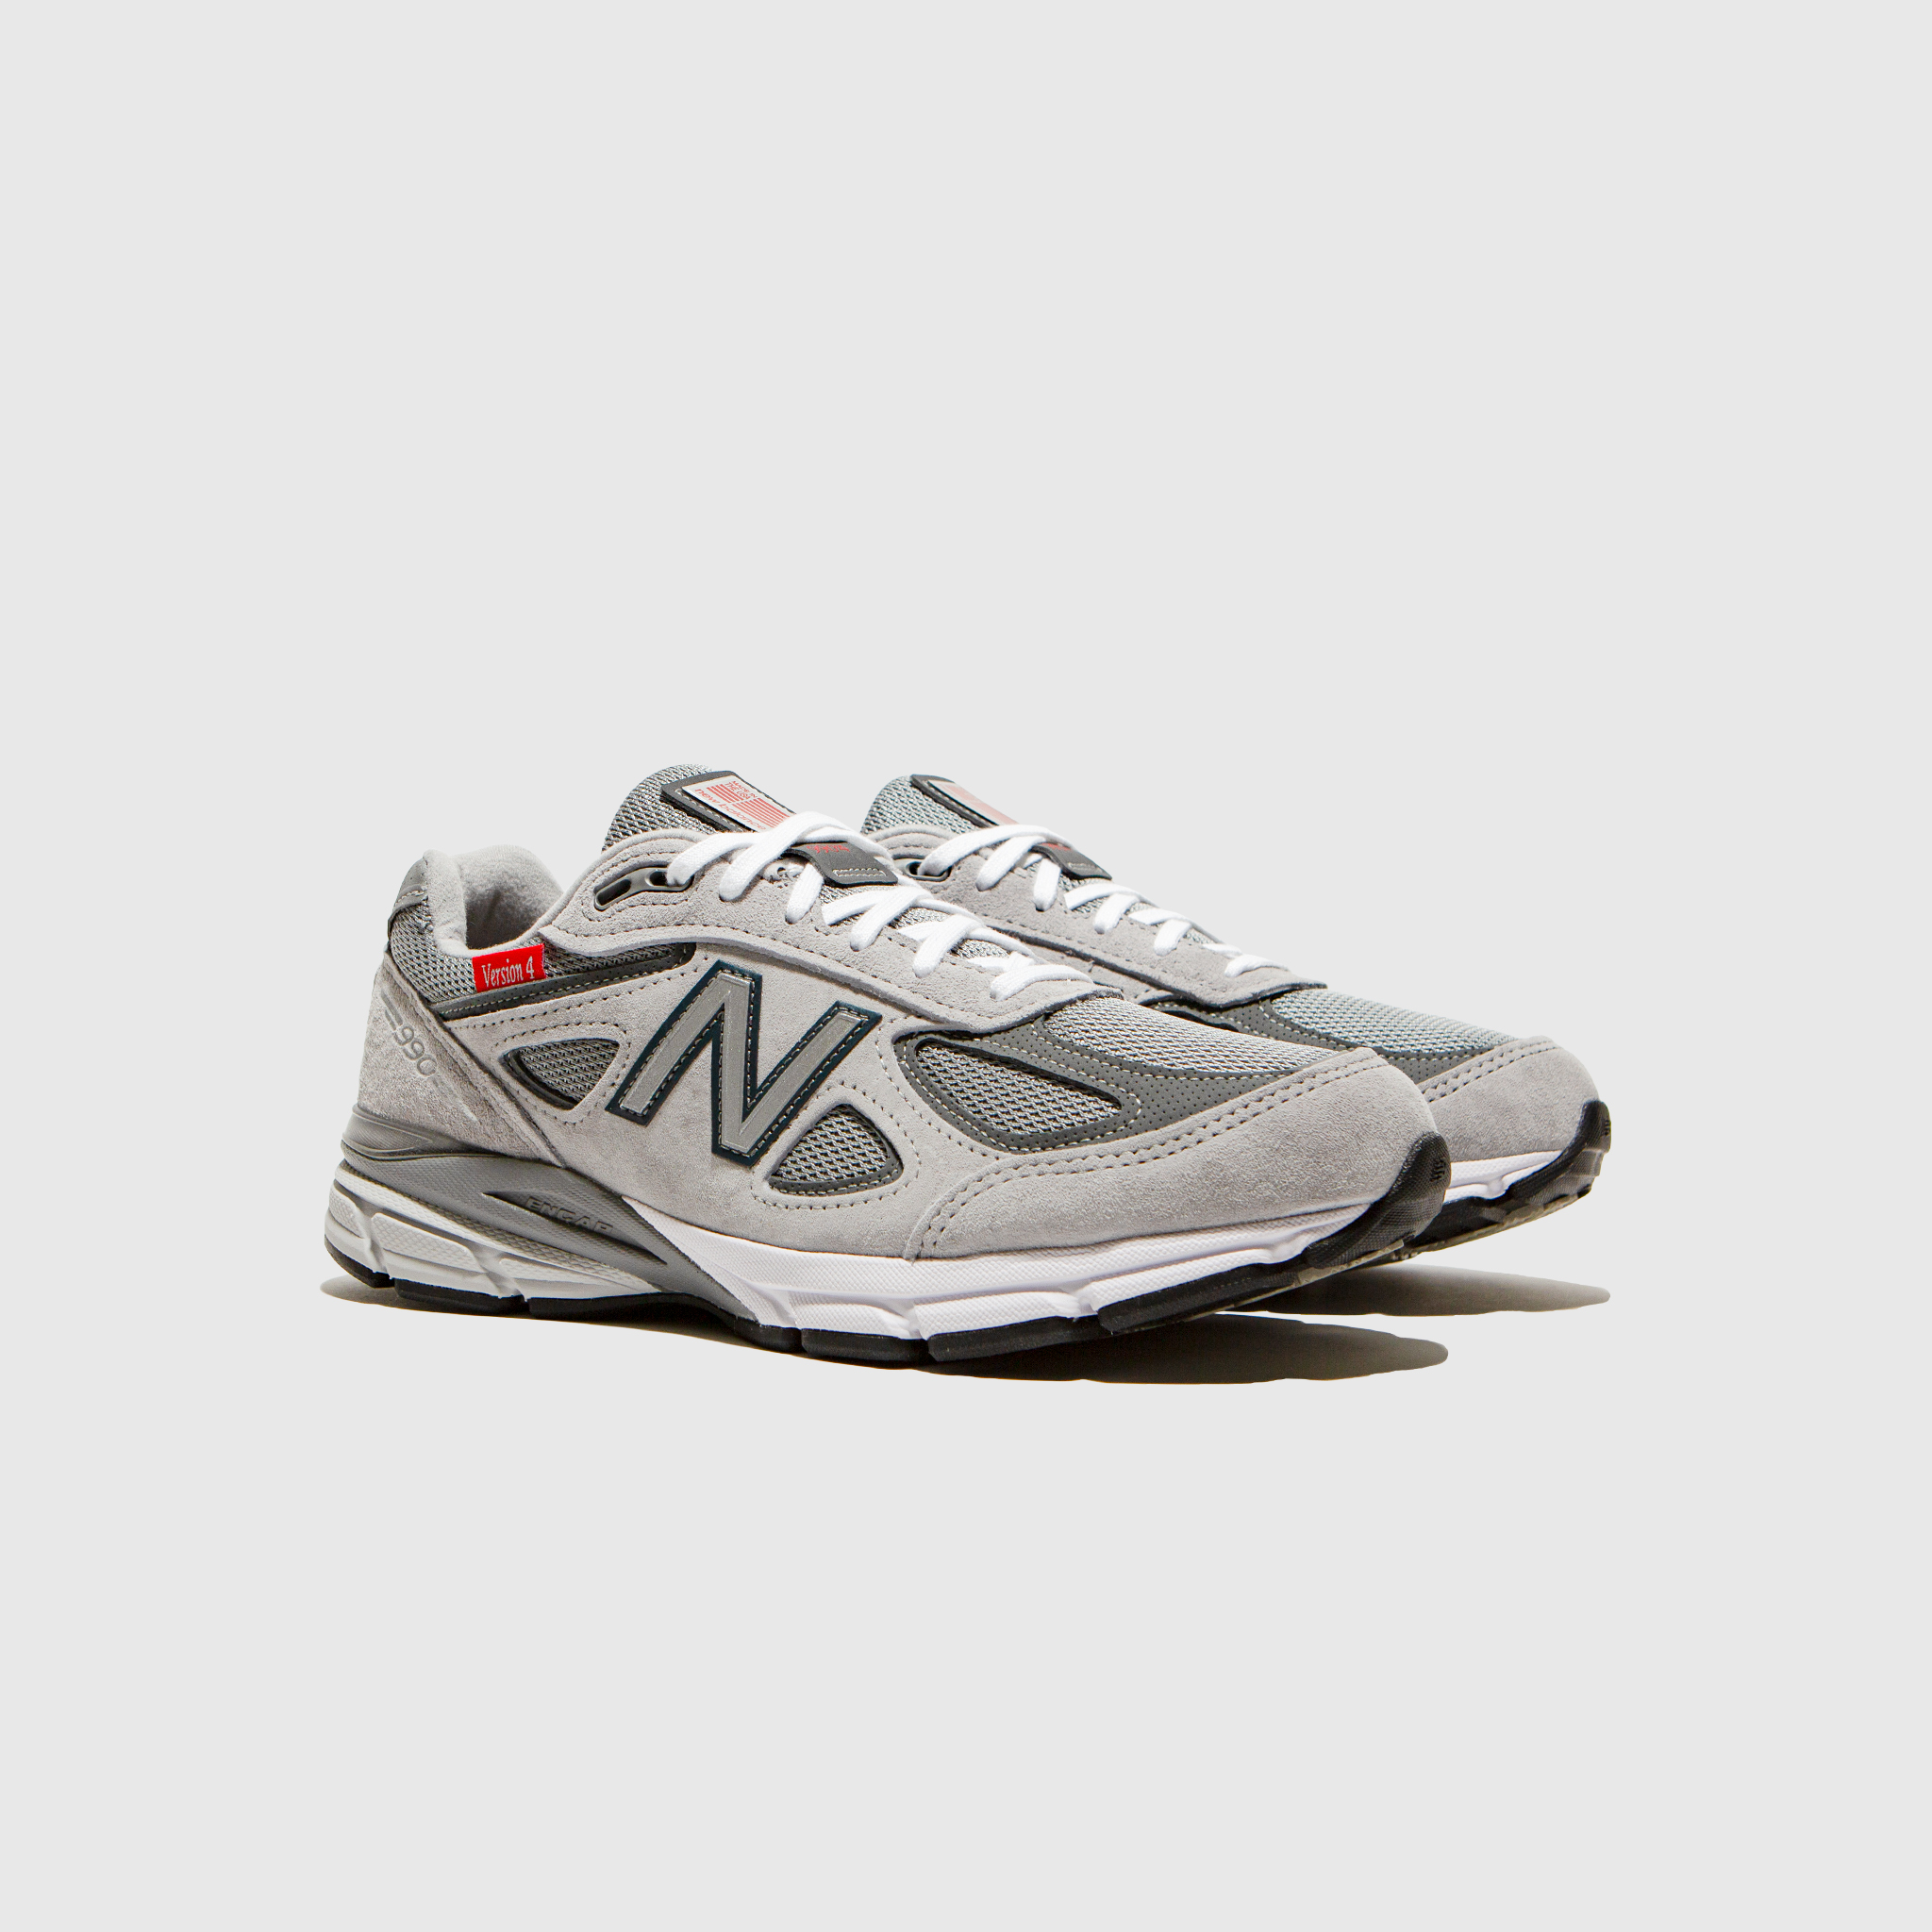 NEW BALANCE M990VS4 MADE IN USA